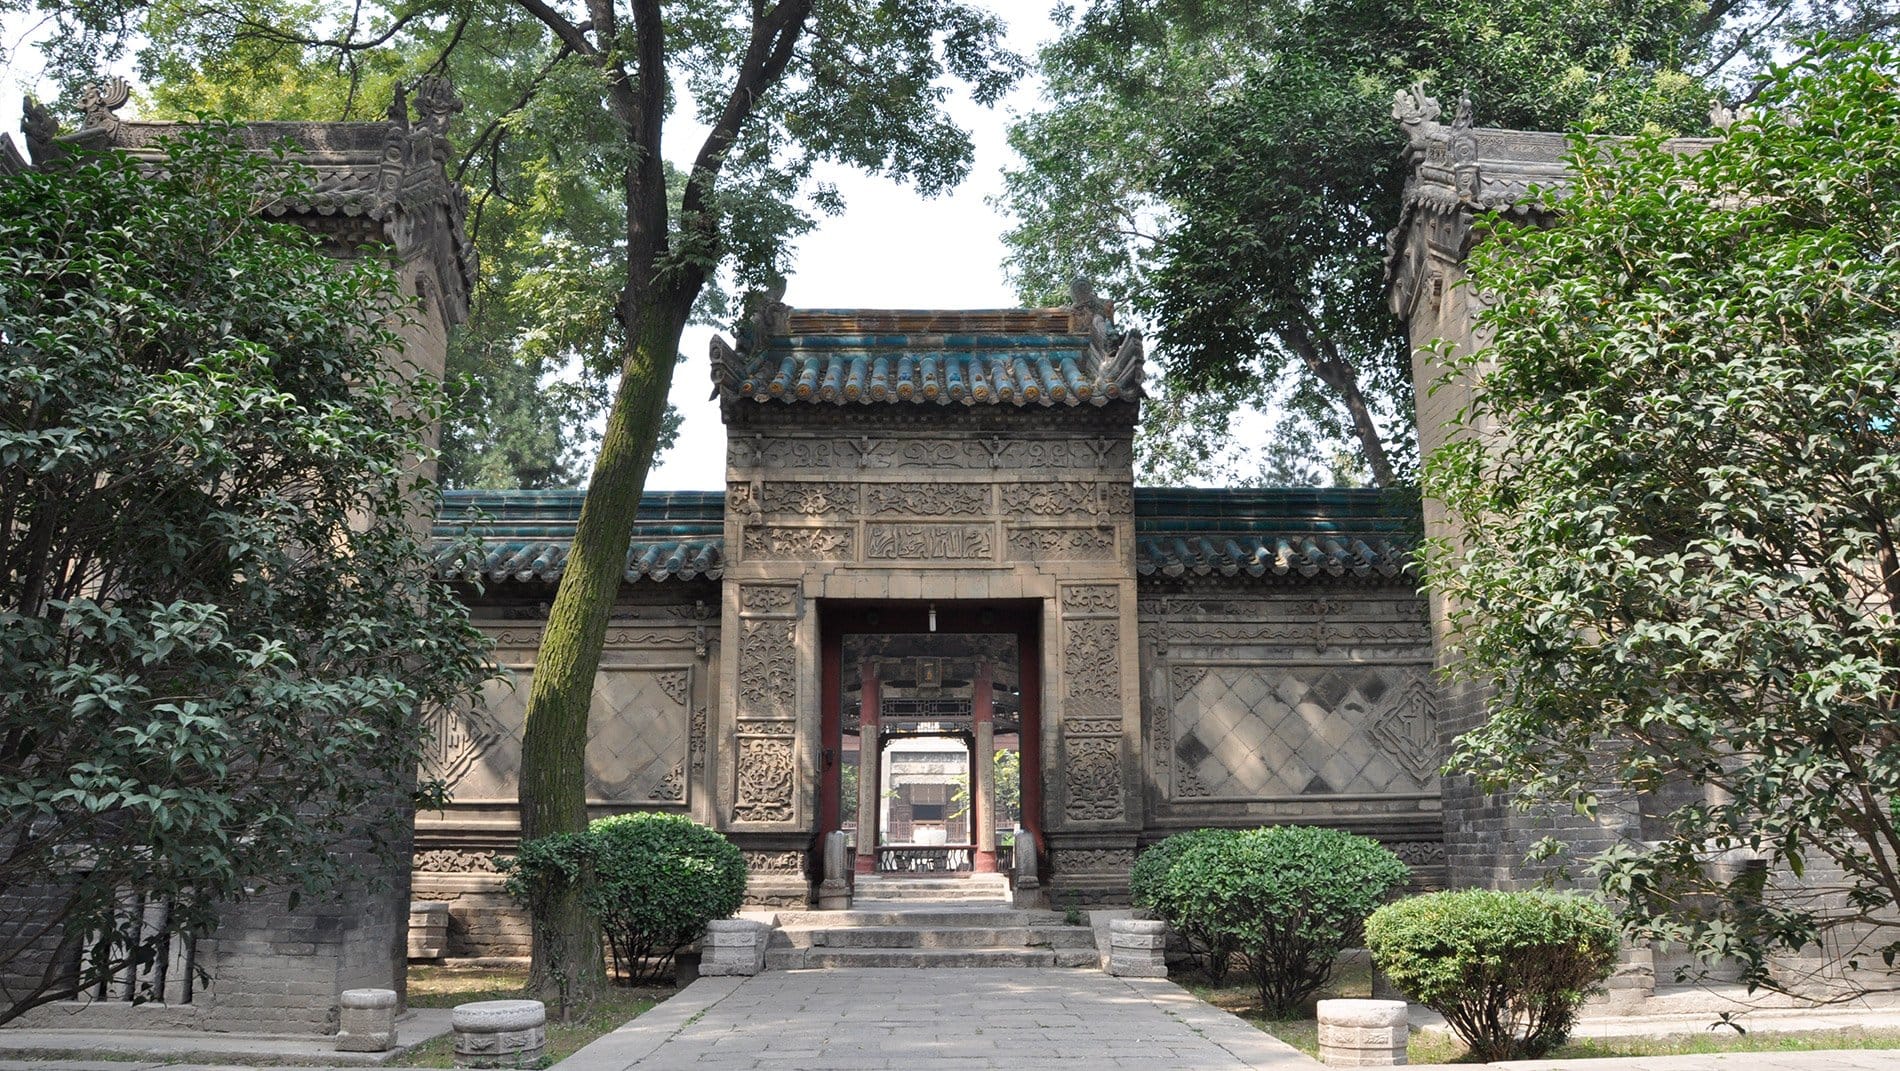 Great Mosque & Muslim Quarter~Xi'an's Muslim community is descended from the Arab Muslims who ventured here along the silk road in the fourth century. They helped create one of the world's first multicultural cities and are proud of their long history in China.